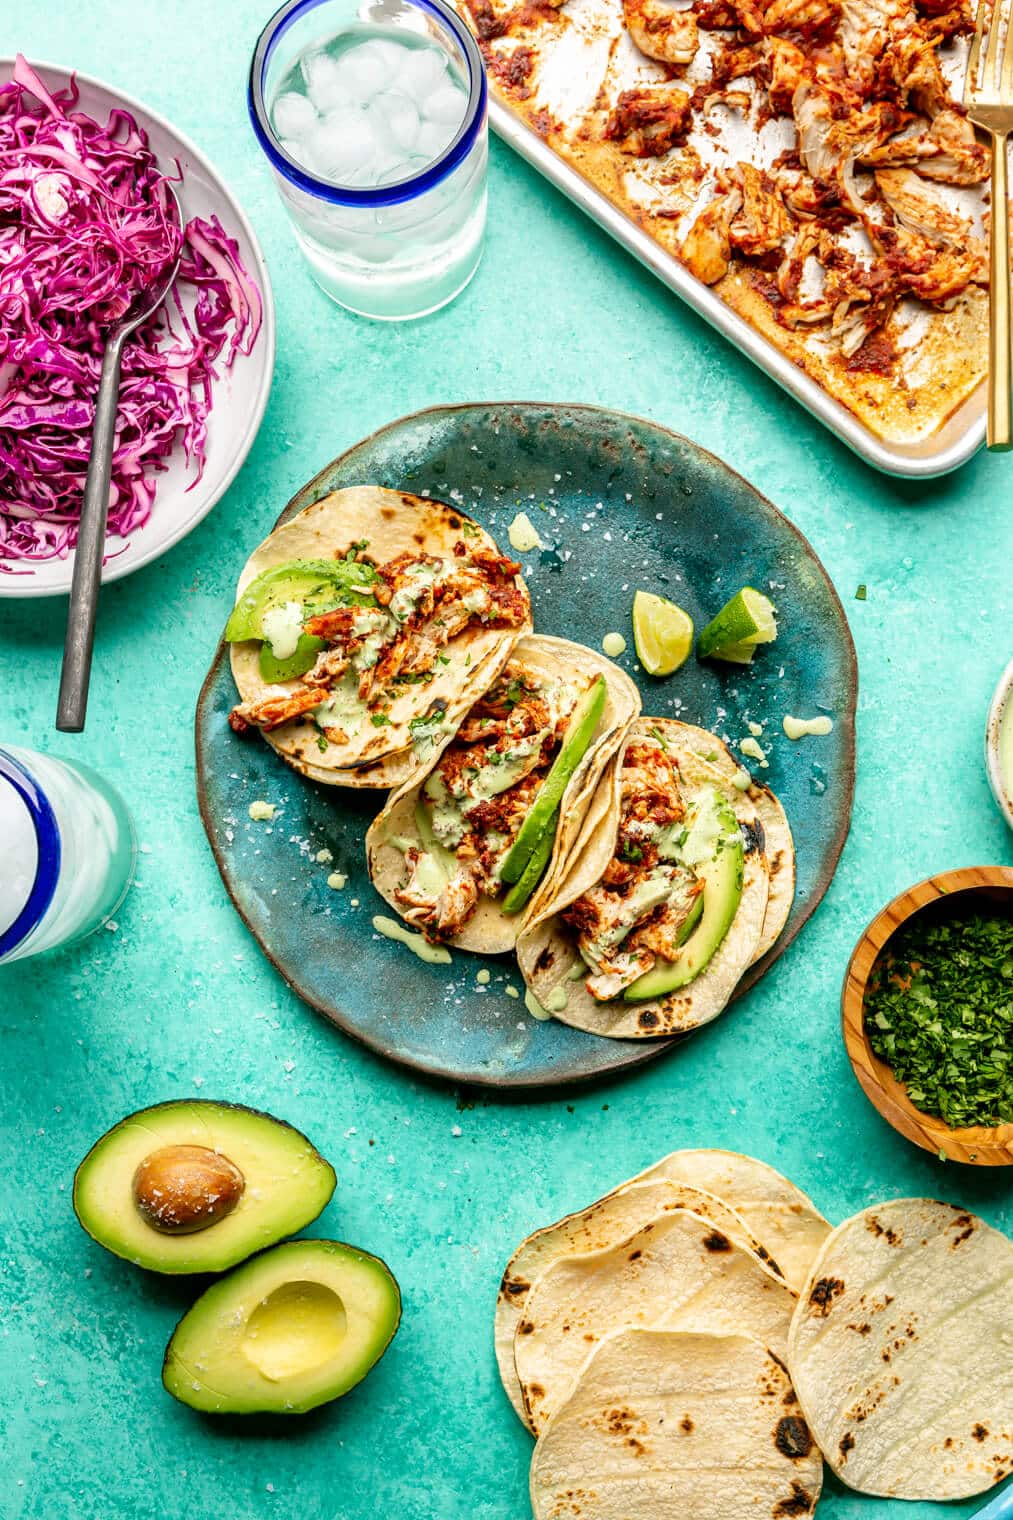 Top down view of three chicken Tinga tacos on a teal plate. The tacos are topped with cilantro, avocado, a drizzle of crema, with a side of lime. There is an avocado cut in half on the table as well as charred corn tortillas, a plate of purple cabbage slaw, a bowl of chopped cilantro, and a sheet pan with chicken Tinga. All are sitting on a teal surface.